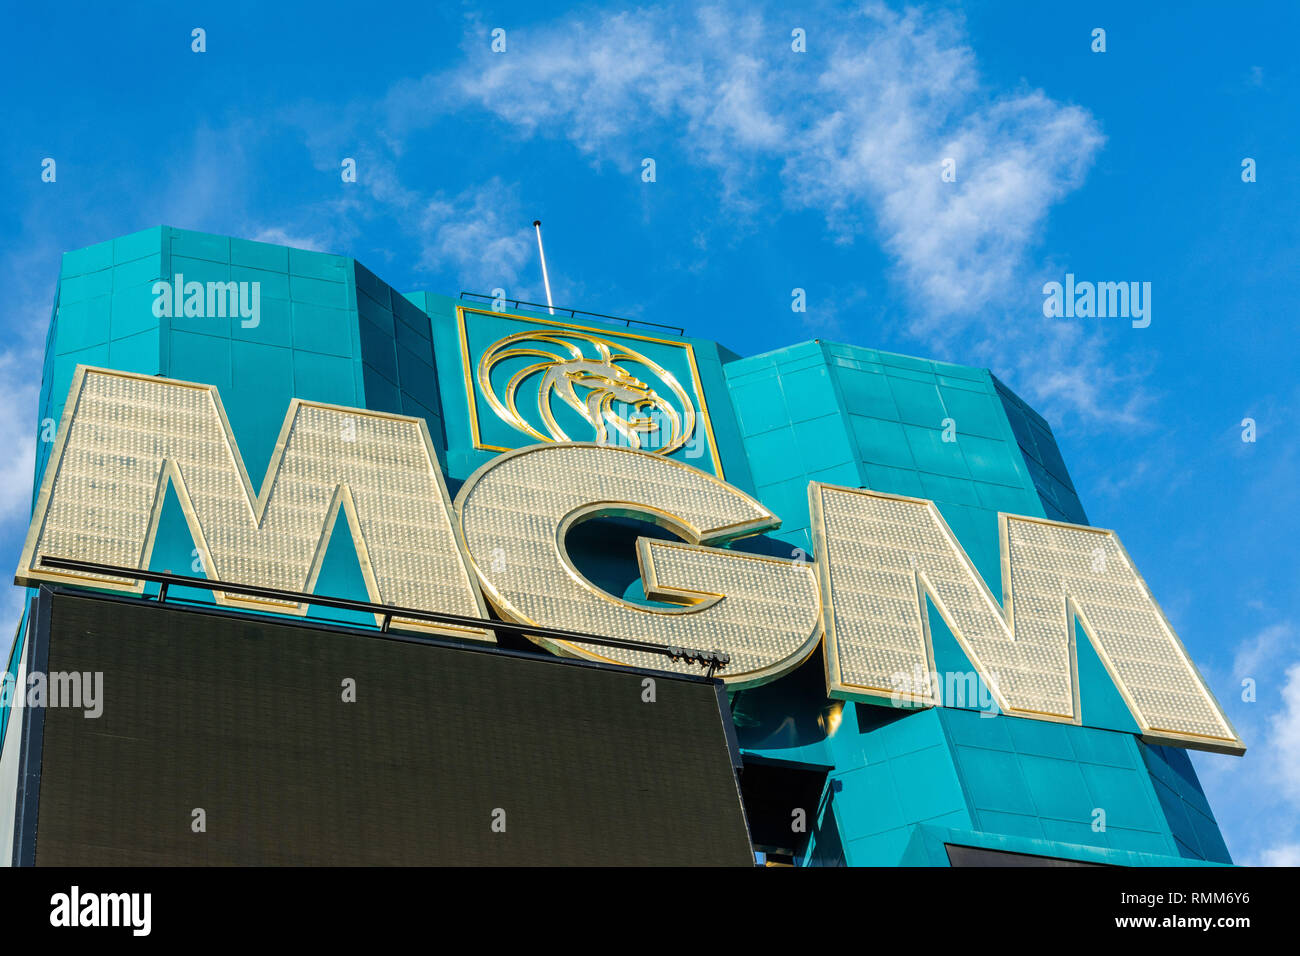 Las Vegas, Nevada, United States of America - January 11, 2017. MGM sign on the facade of of MGM Grand Hotel and Casino in Las Vegas, NV. Stock Photo